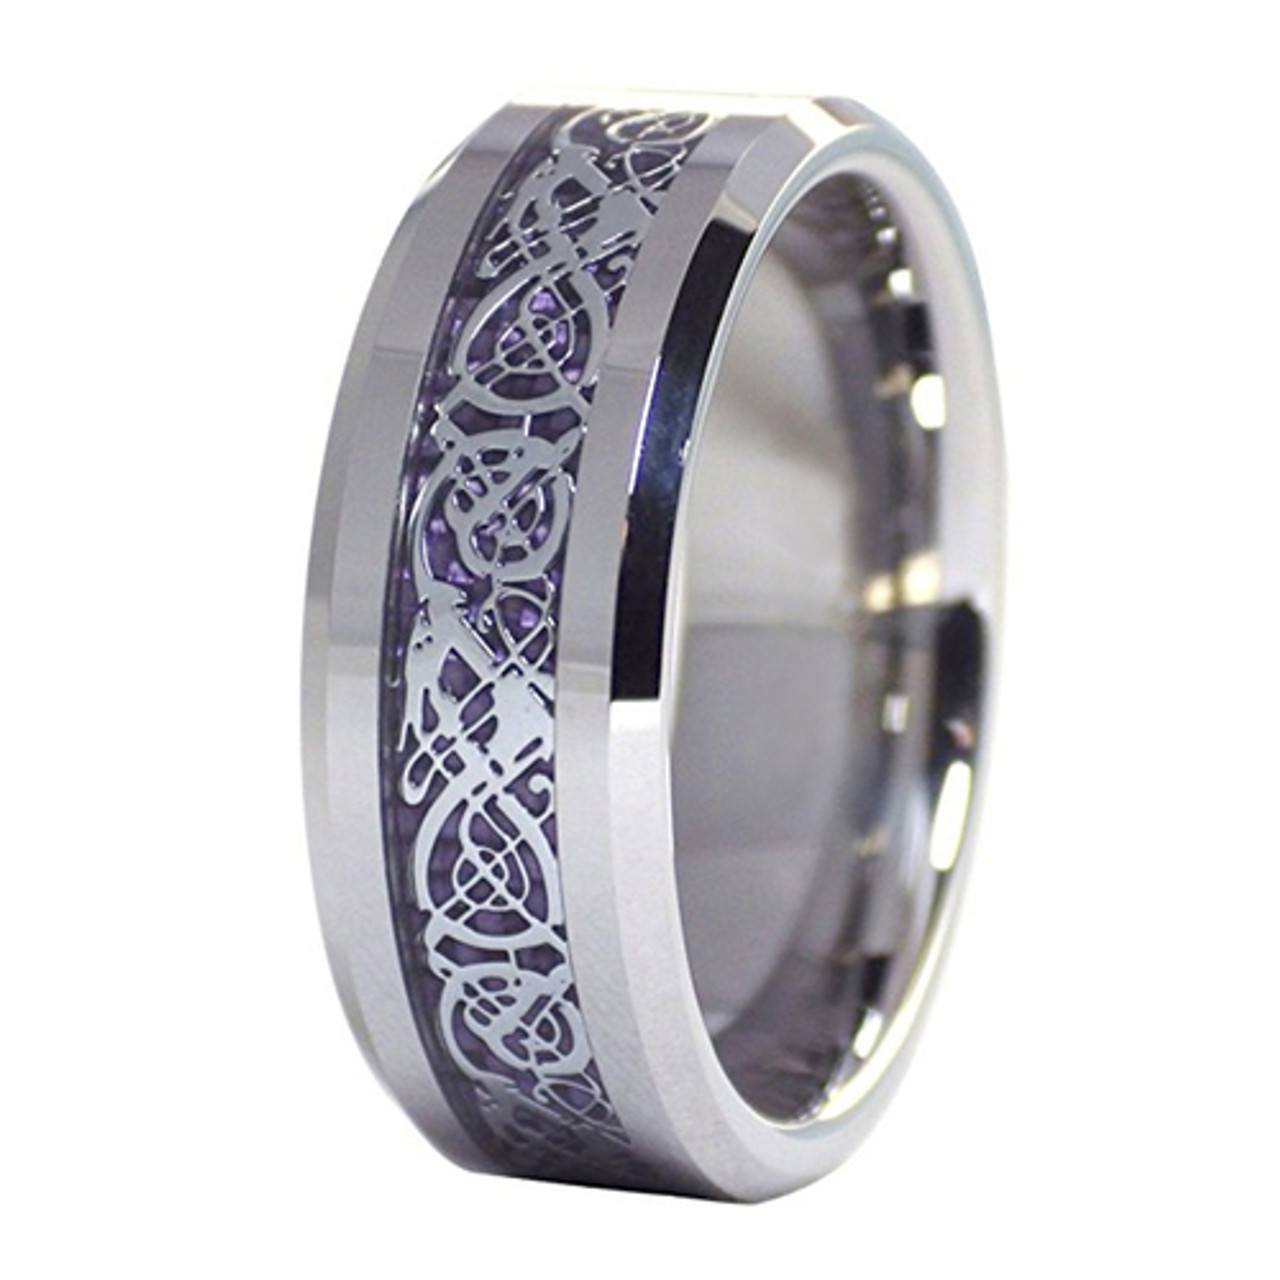 (8mm) Unisex or Men's Tungsten Carbide Wedding Ring Band. Silver Resin Inlay Purple Celtic Knot Ring.